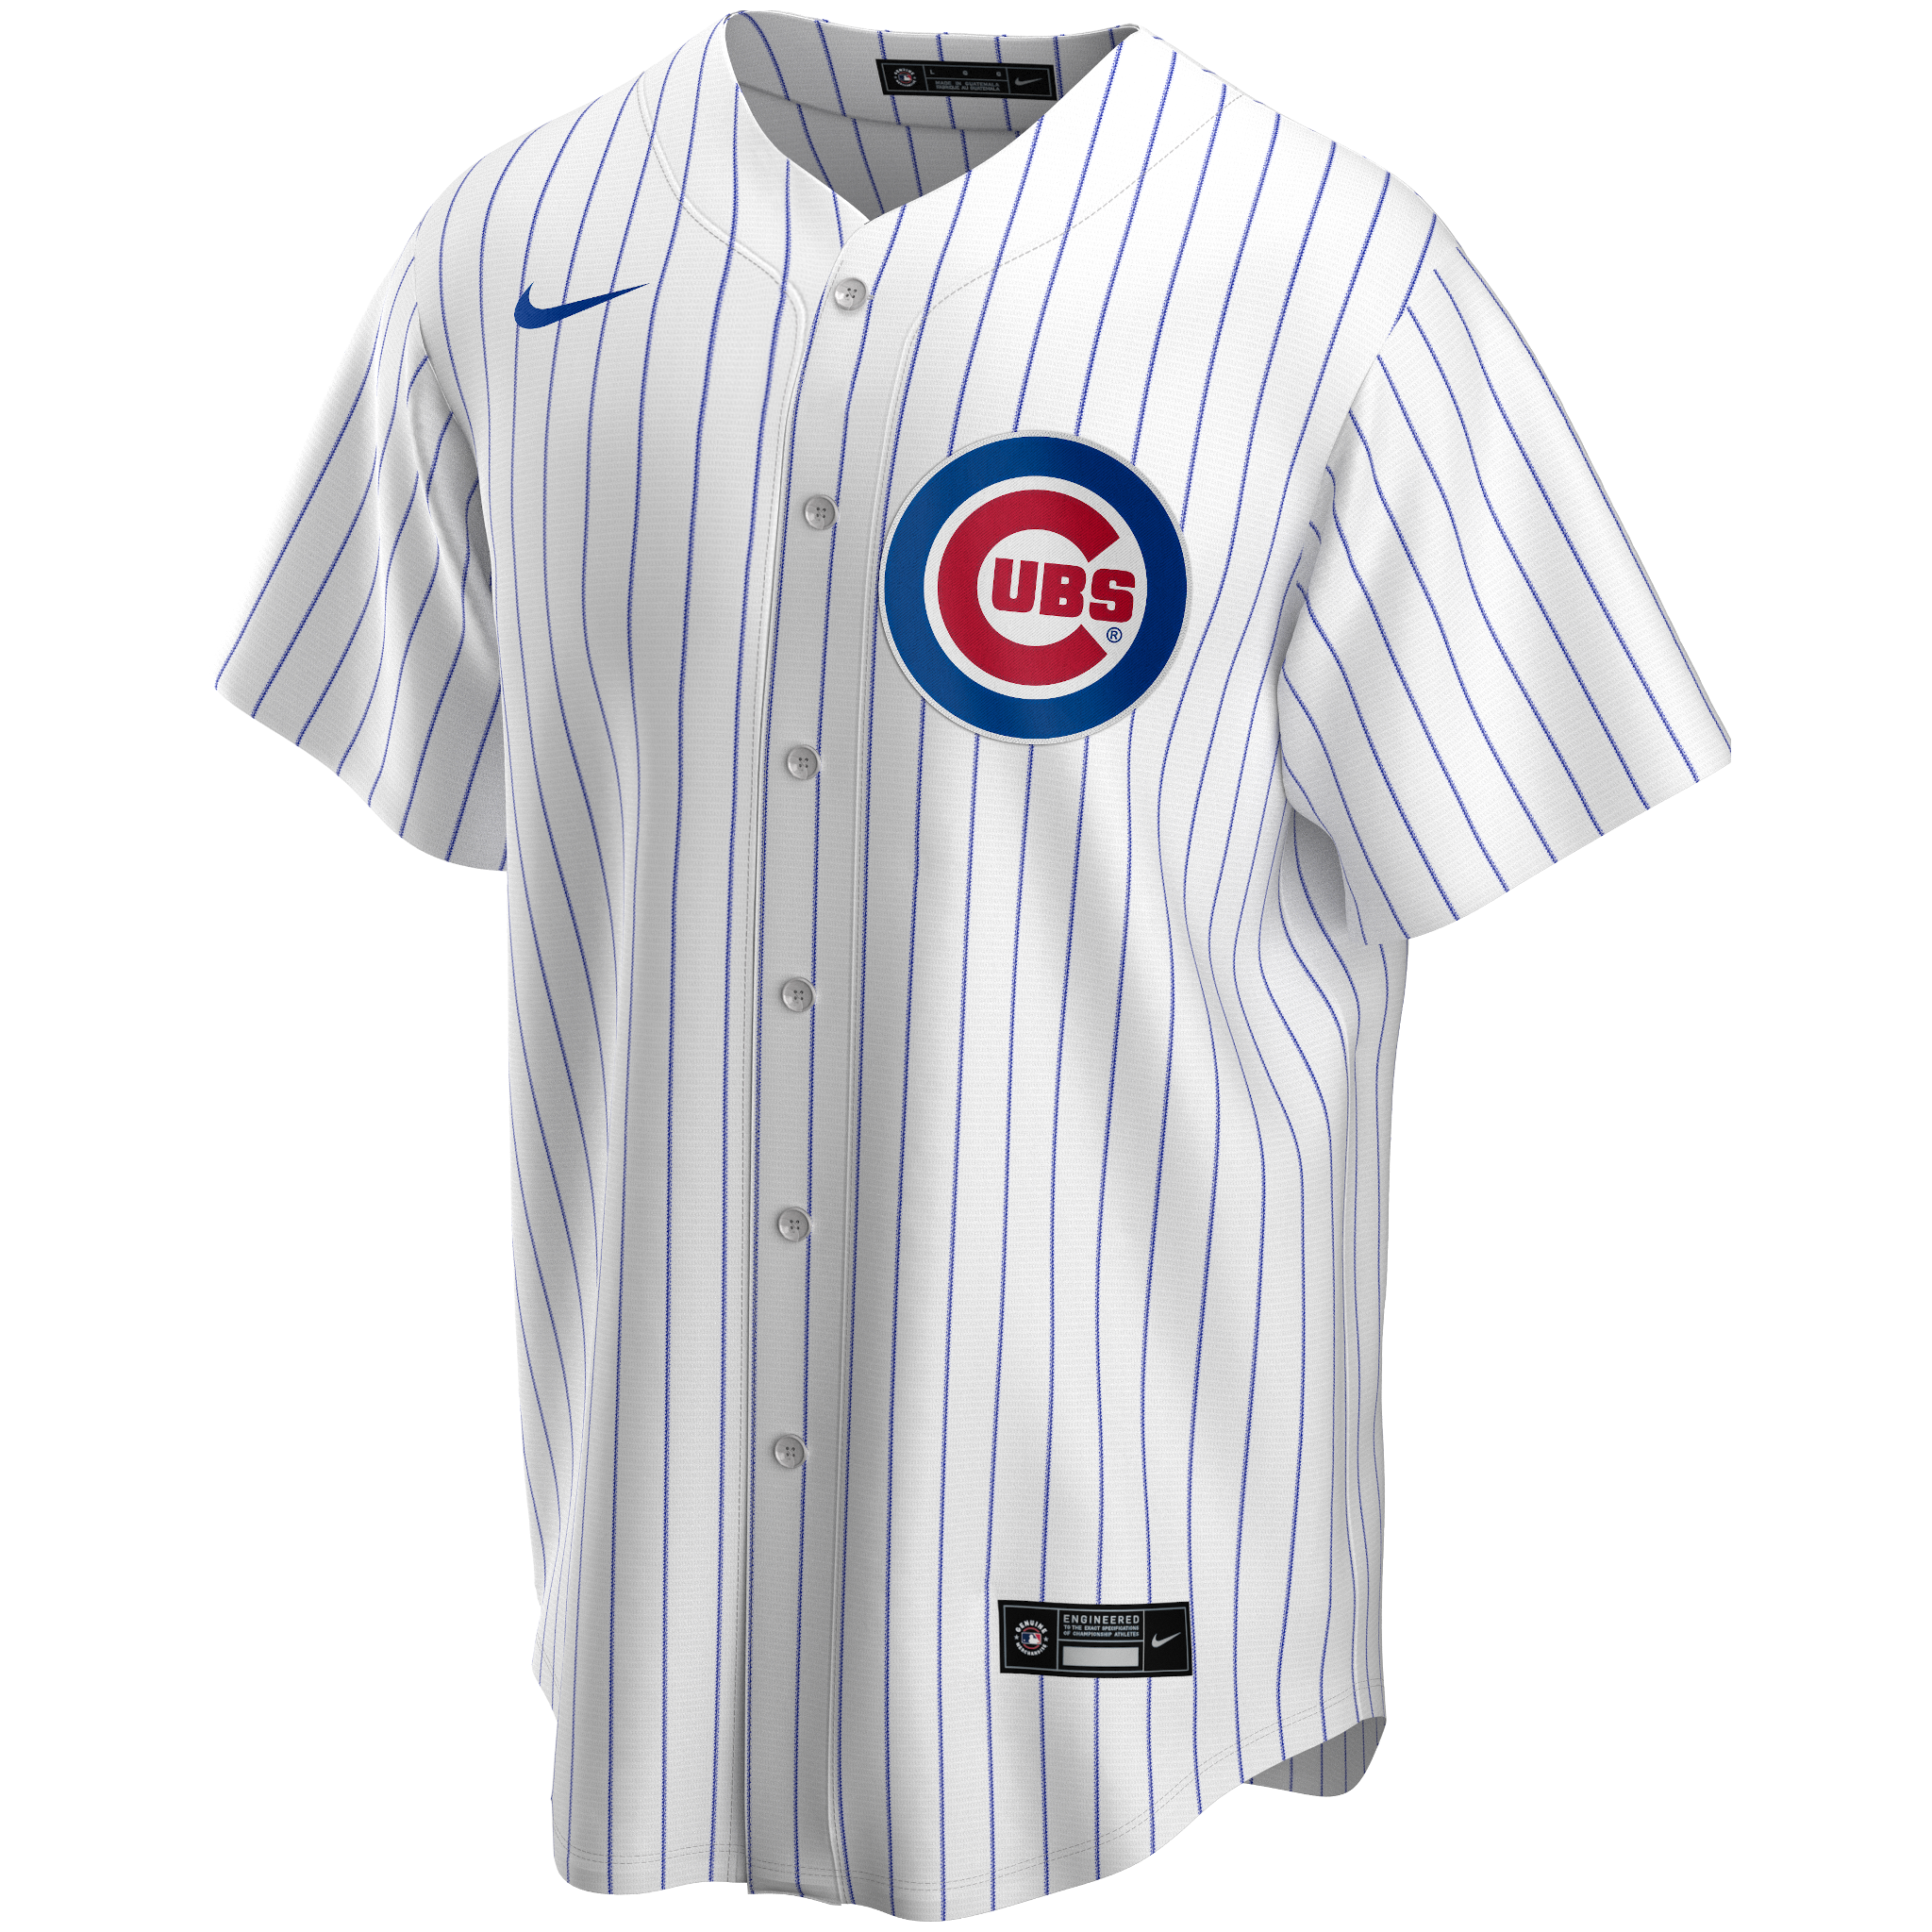 baez youth jersey